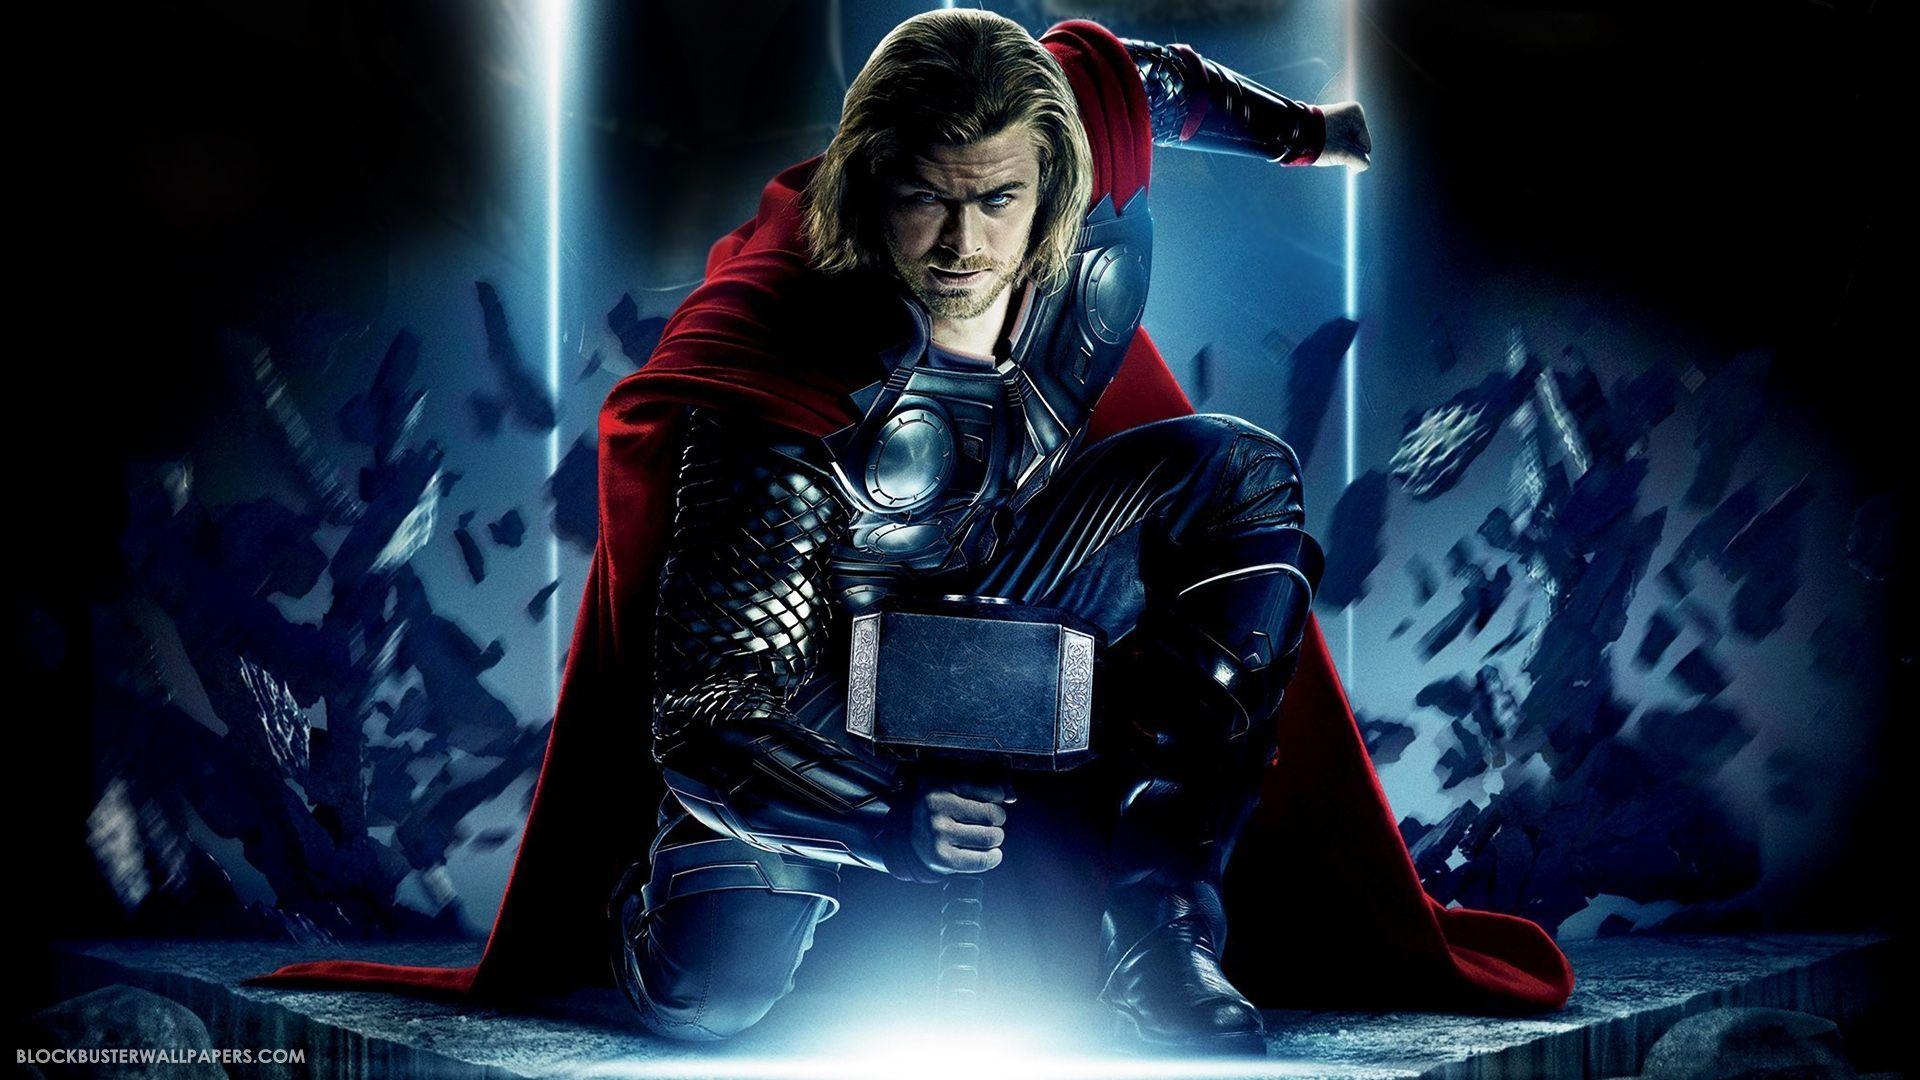 The Avengers Thor Wallpaper - High Definition, High Resolution HD Wallpapers  : High Definition, High Resolution HD Wallpapers